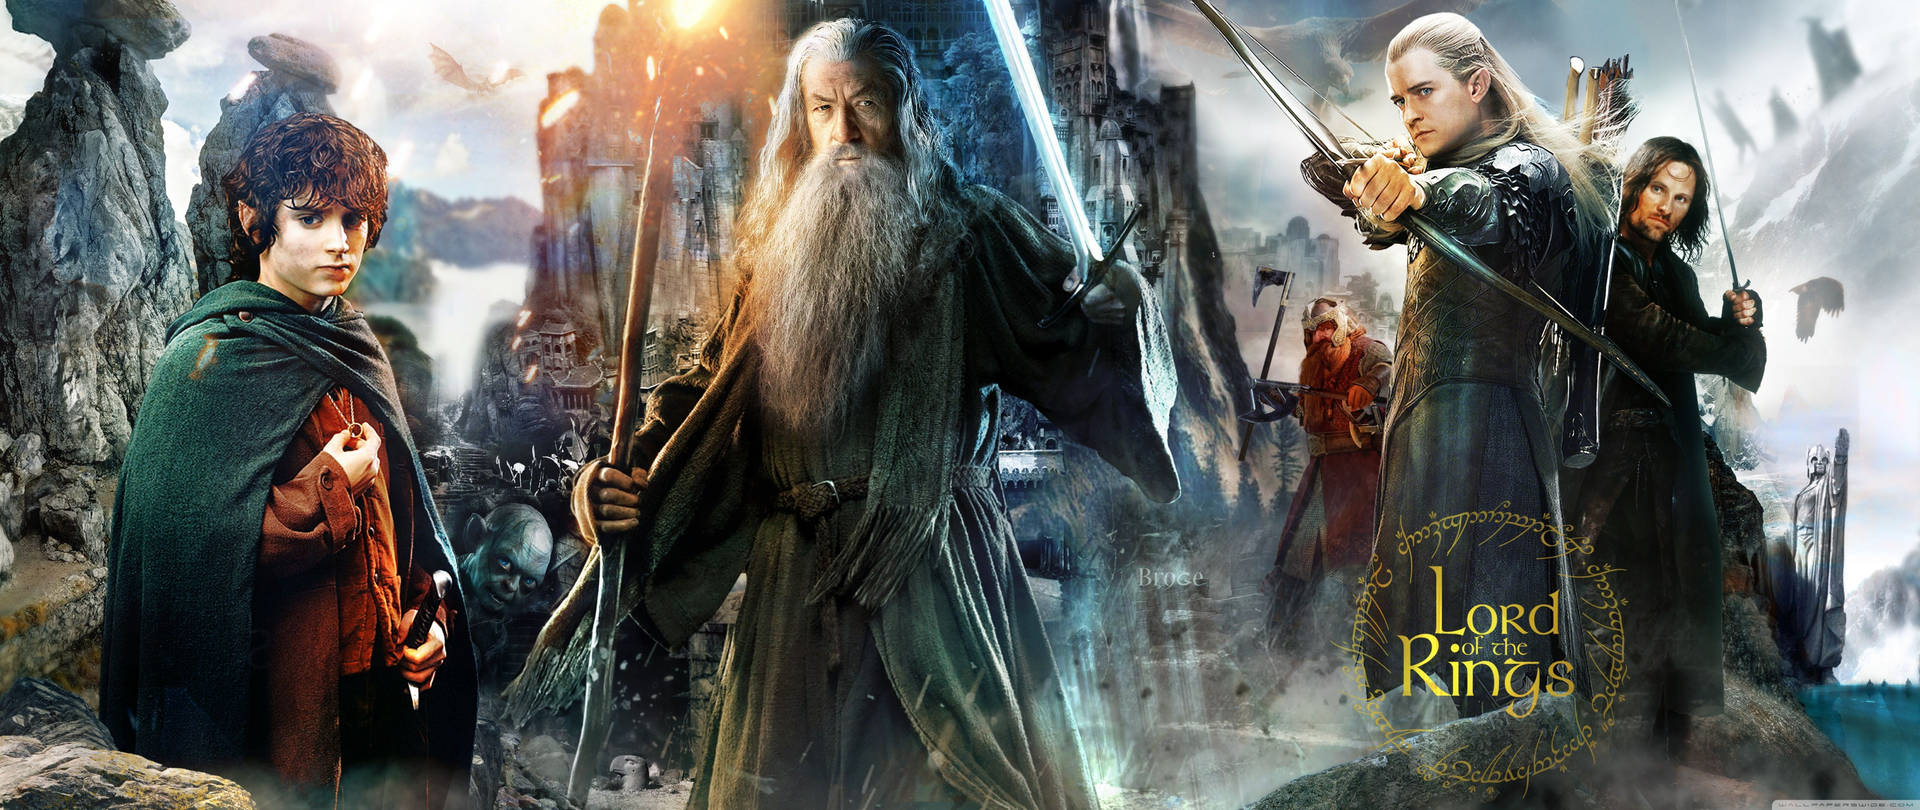 Free Lord Of The Rings Wallpaper Downloads, Lord Of The Rings Wallpaper for FREE